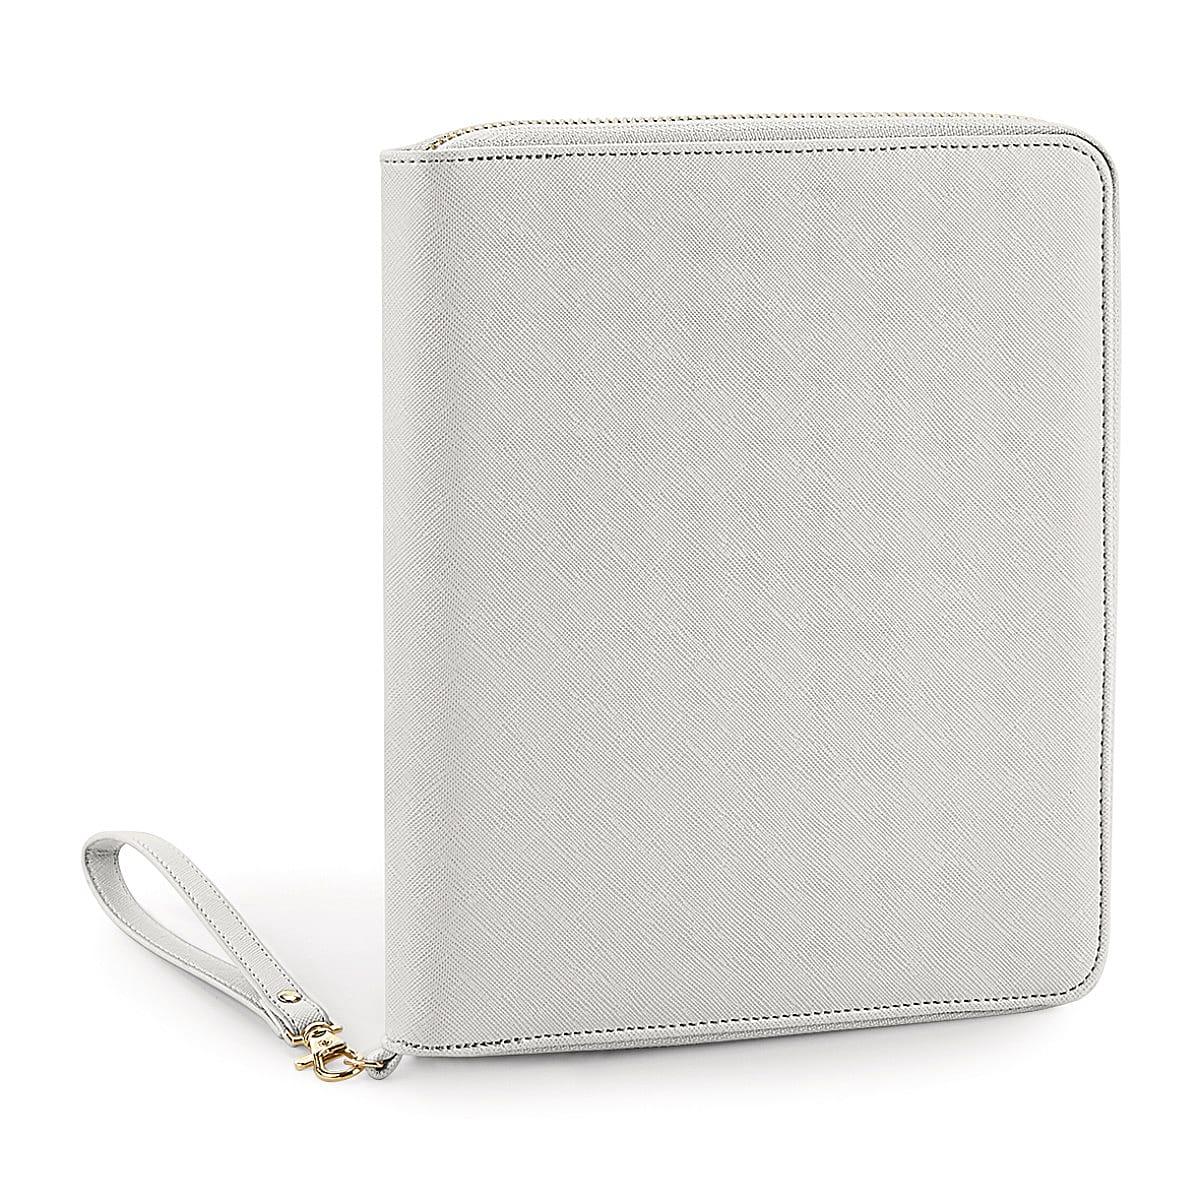 Bagbase Boutique Travel Tech Organiser in Soft Grey (Product Code: BG756)